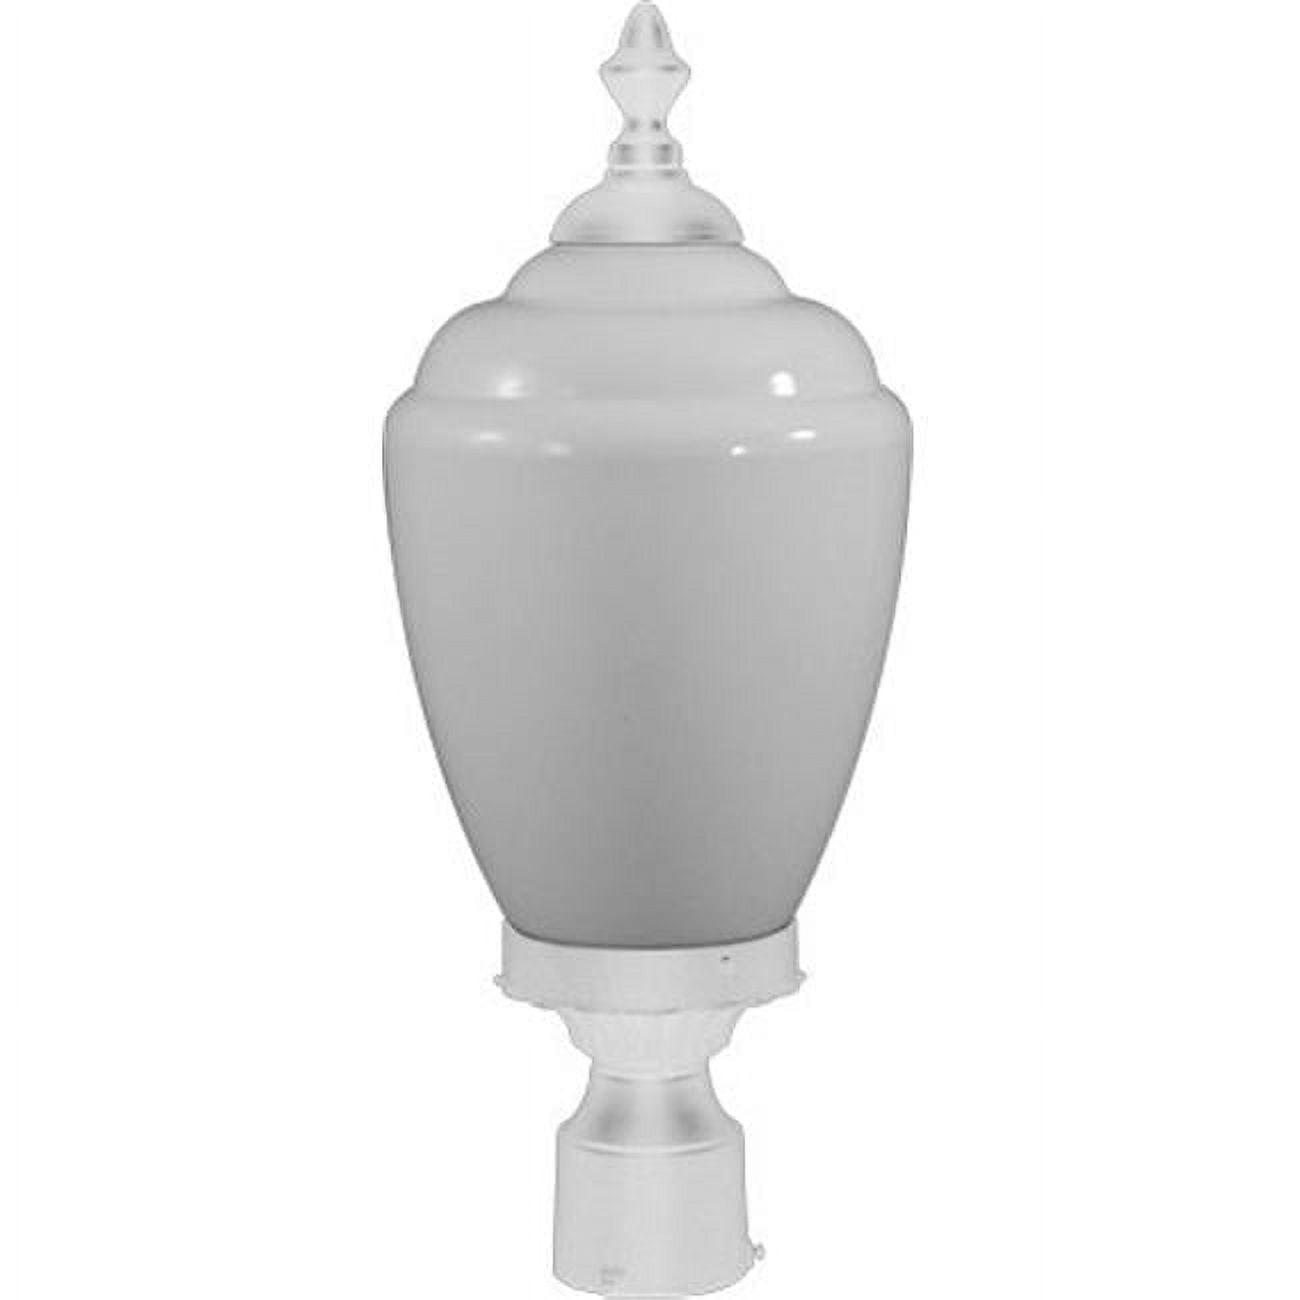 Picture of Dabmar Lighting GM285-W Powder Coated Cast Aluminum Post Top Light Fixture, White - 20.38 x 8.75 x 8.75 in.